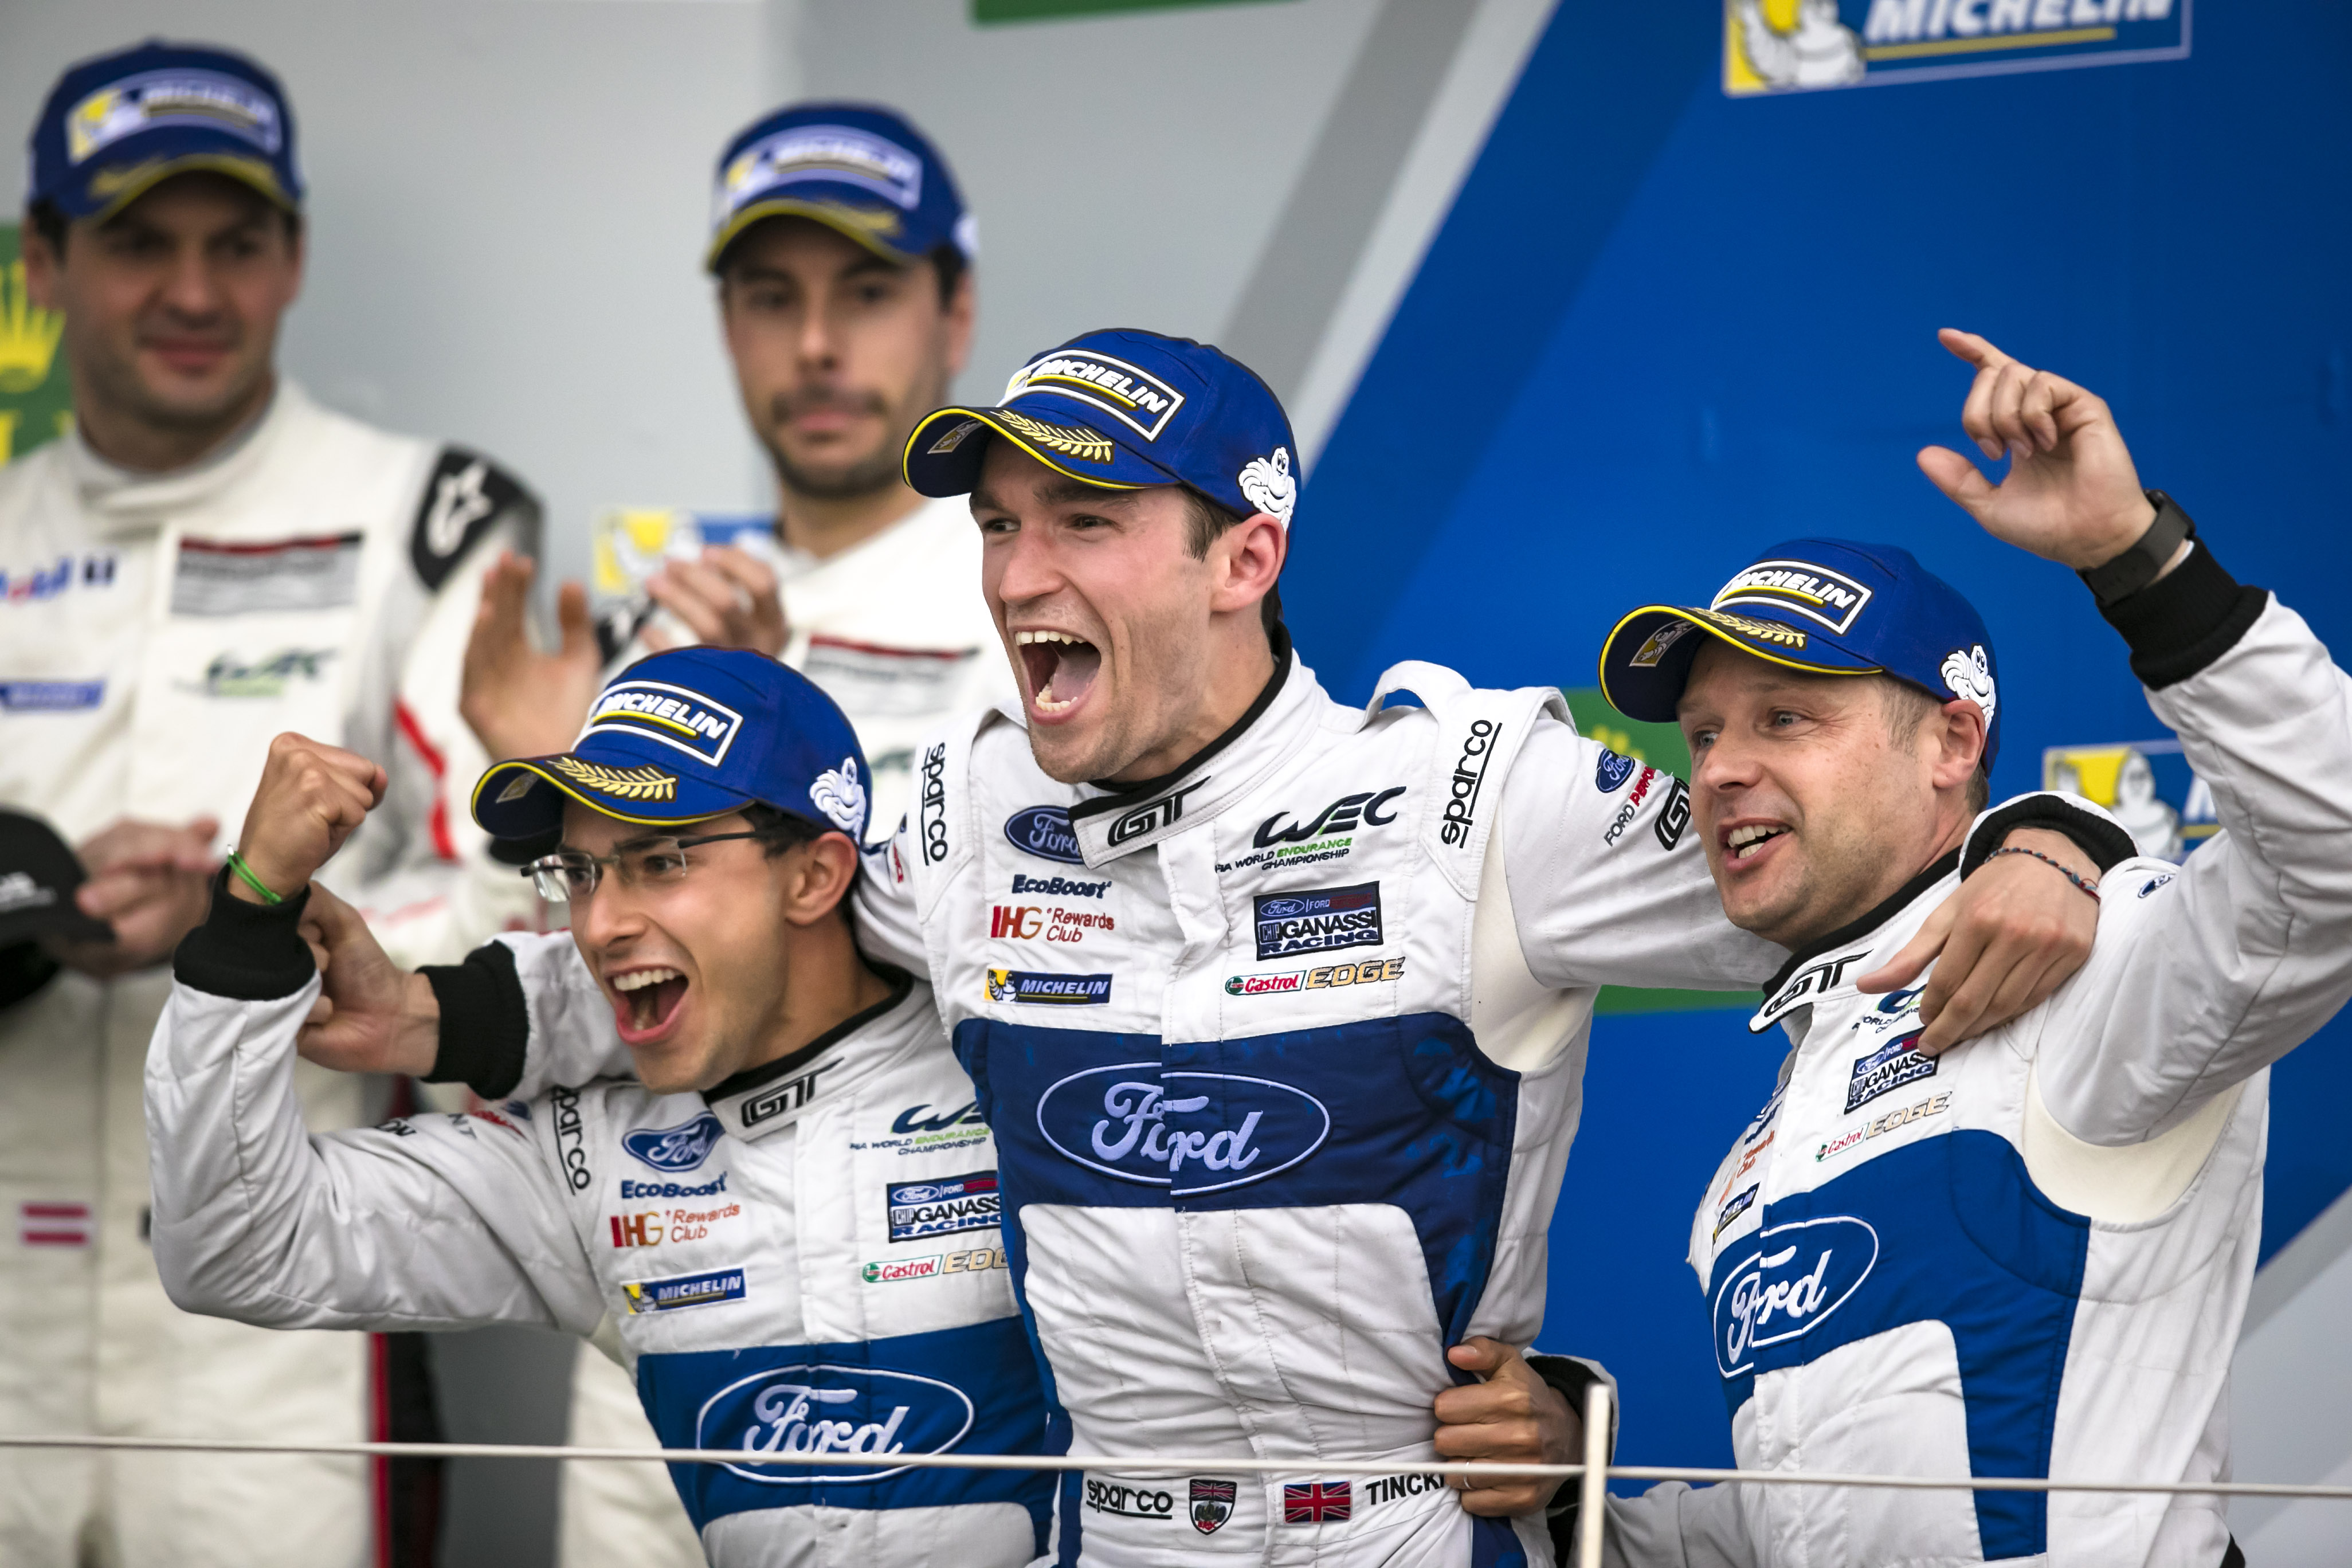 TINCKNELL LEADS WORLD CHAMPIONSHIP AFTER DRAMATIC COMEBACK VICTORY